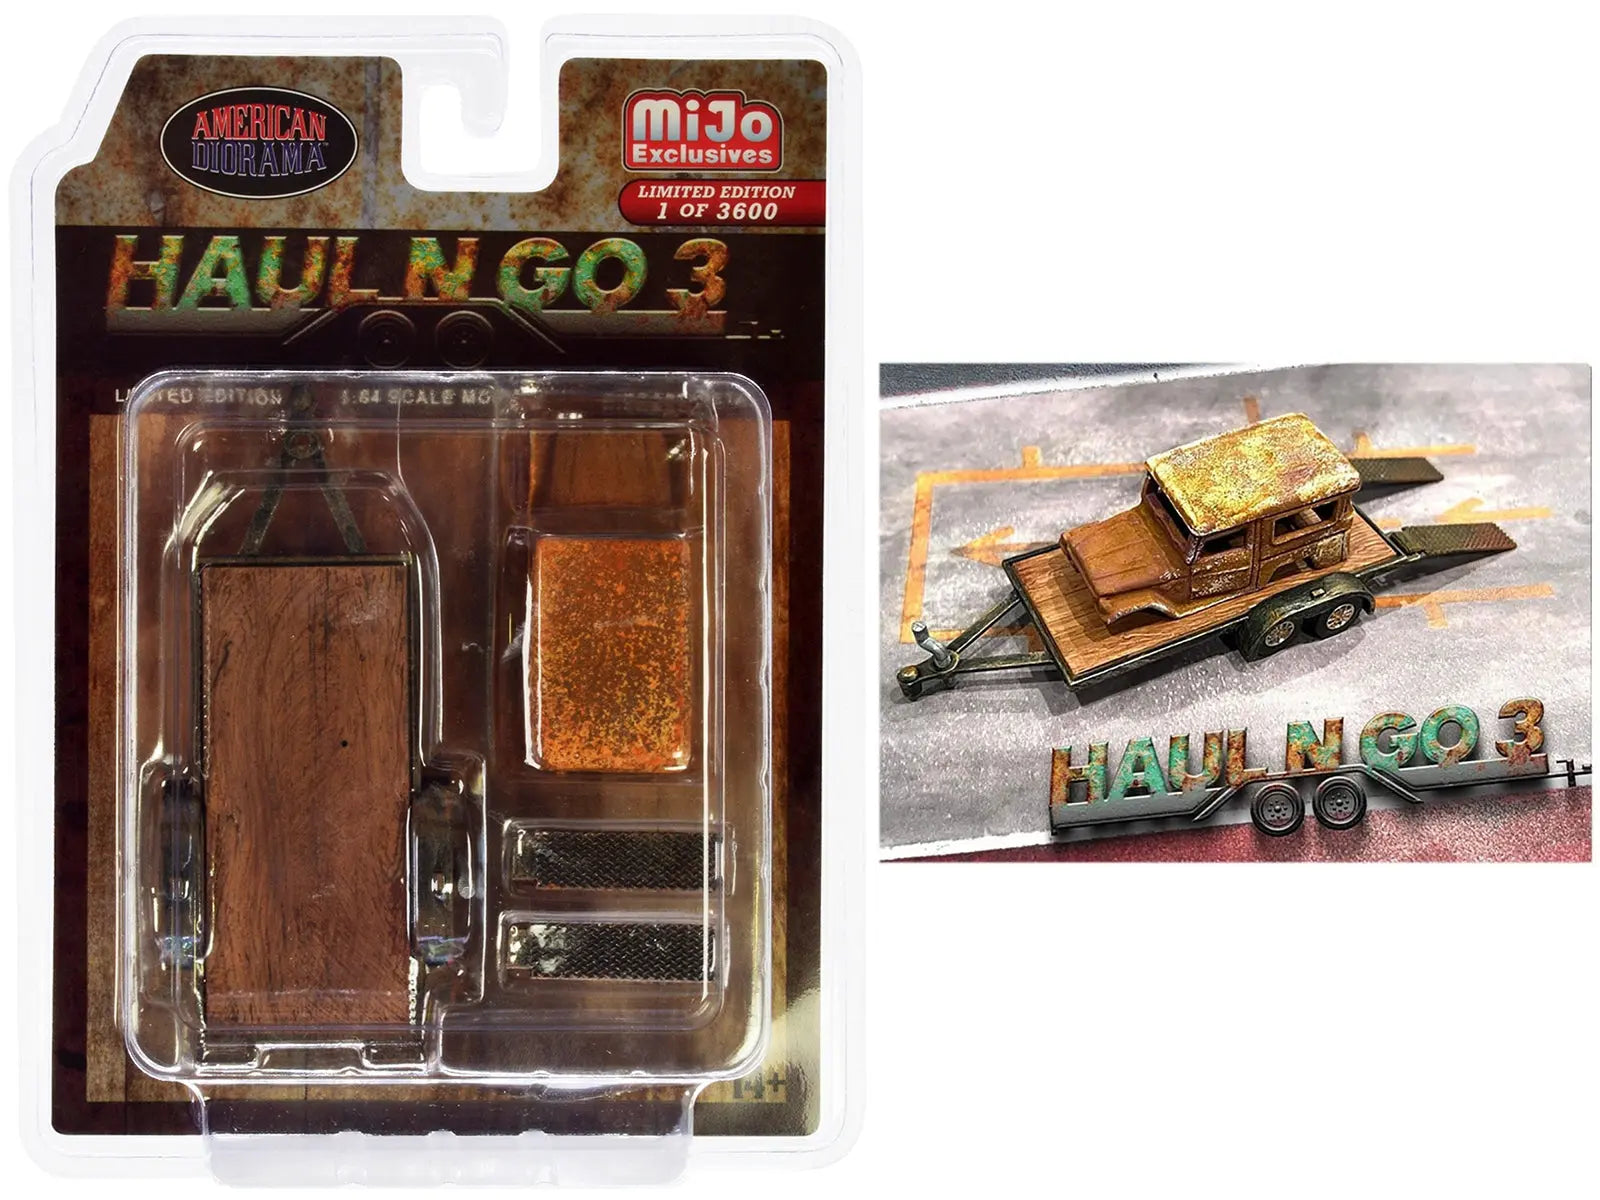 "Haul N Go 3" 4 piece Diecast Model Set (1 Flatbed Trailer 1 Abandoned Car 2 Ramps) Limited Edition to 3600 pieces Worldwide for 1/64 scale models by American Diorama American Diorama